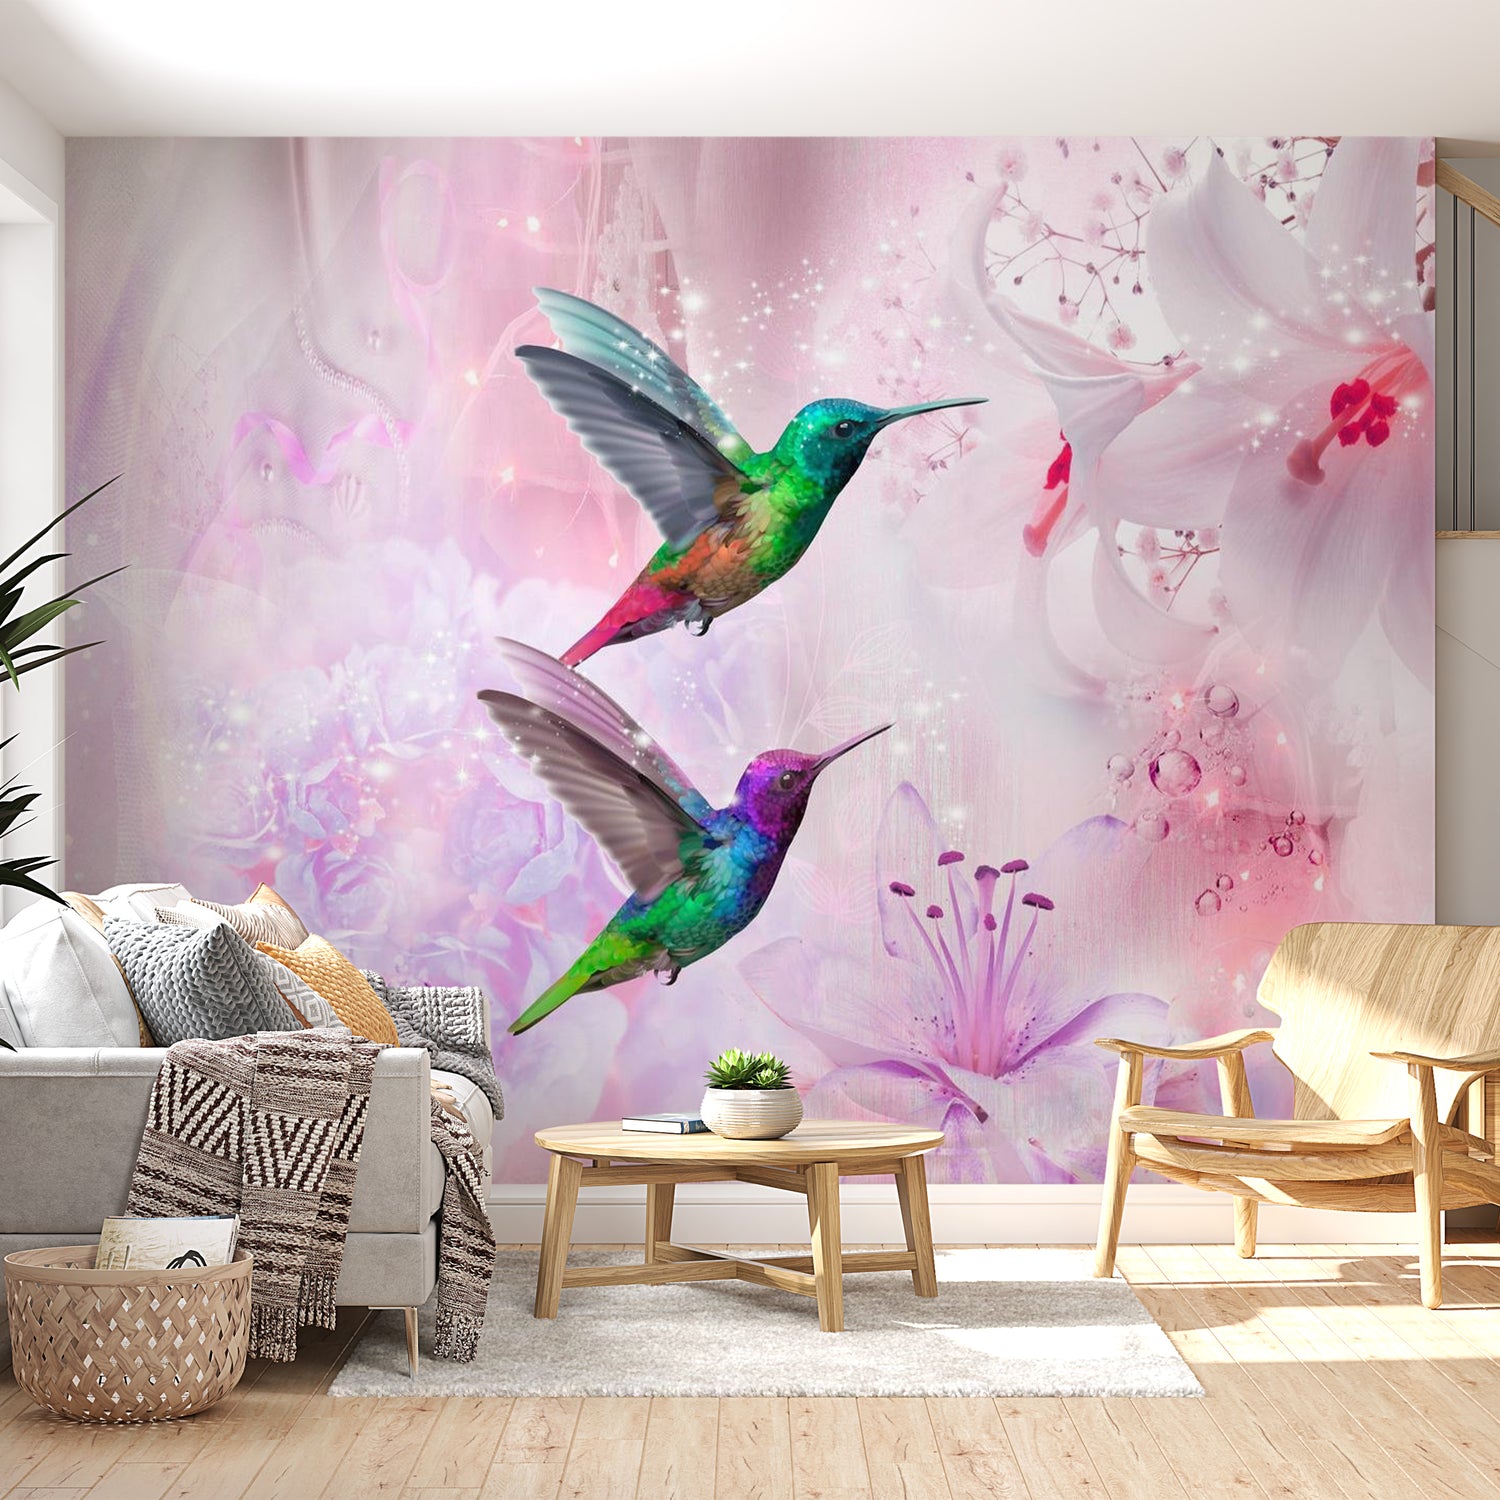 Peel & Stick Animal Wall Mural - Colourful Hummingbirds Purple - Removable Wall Decals